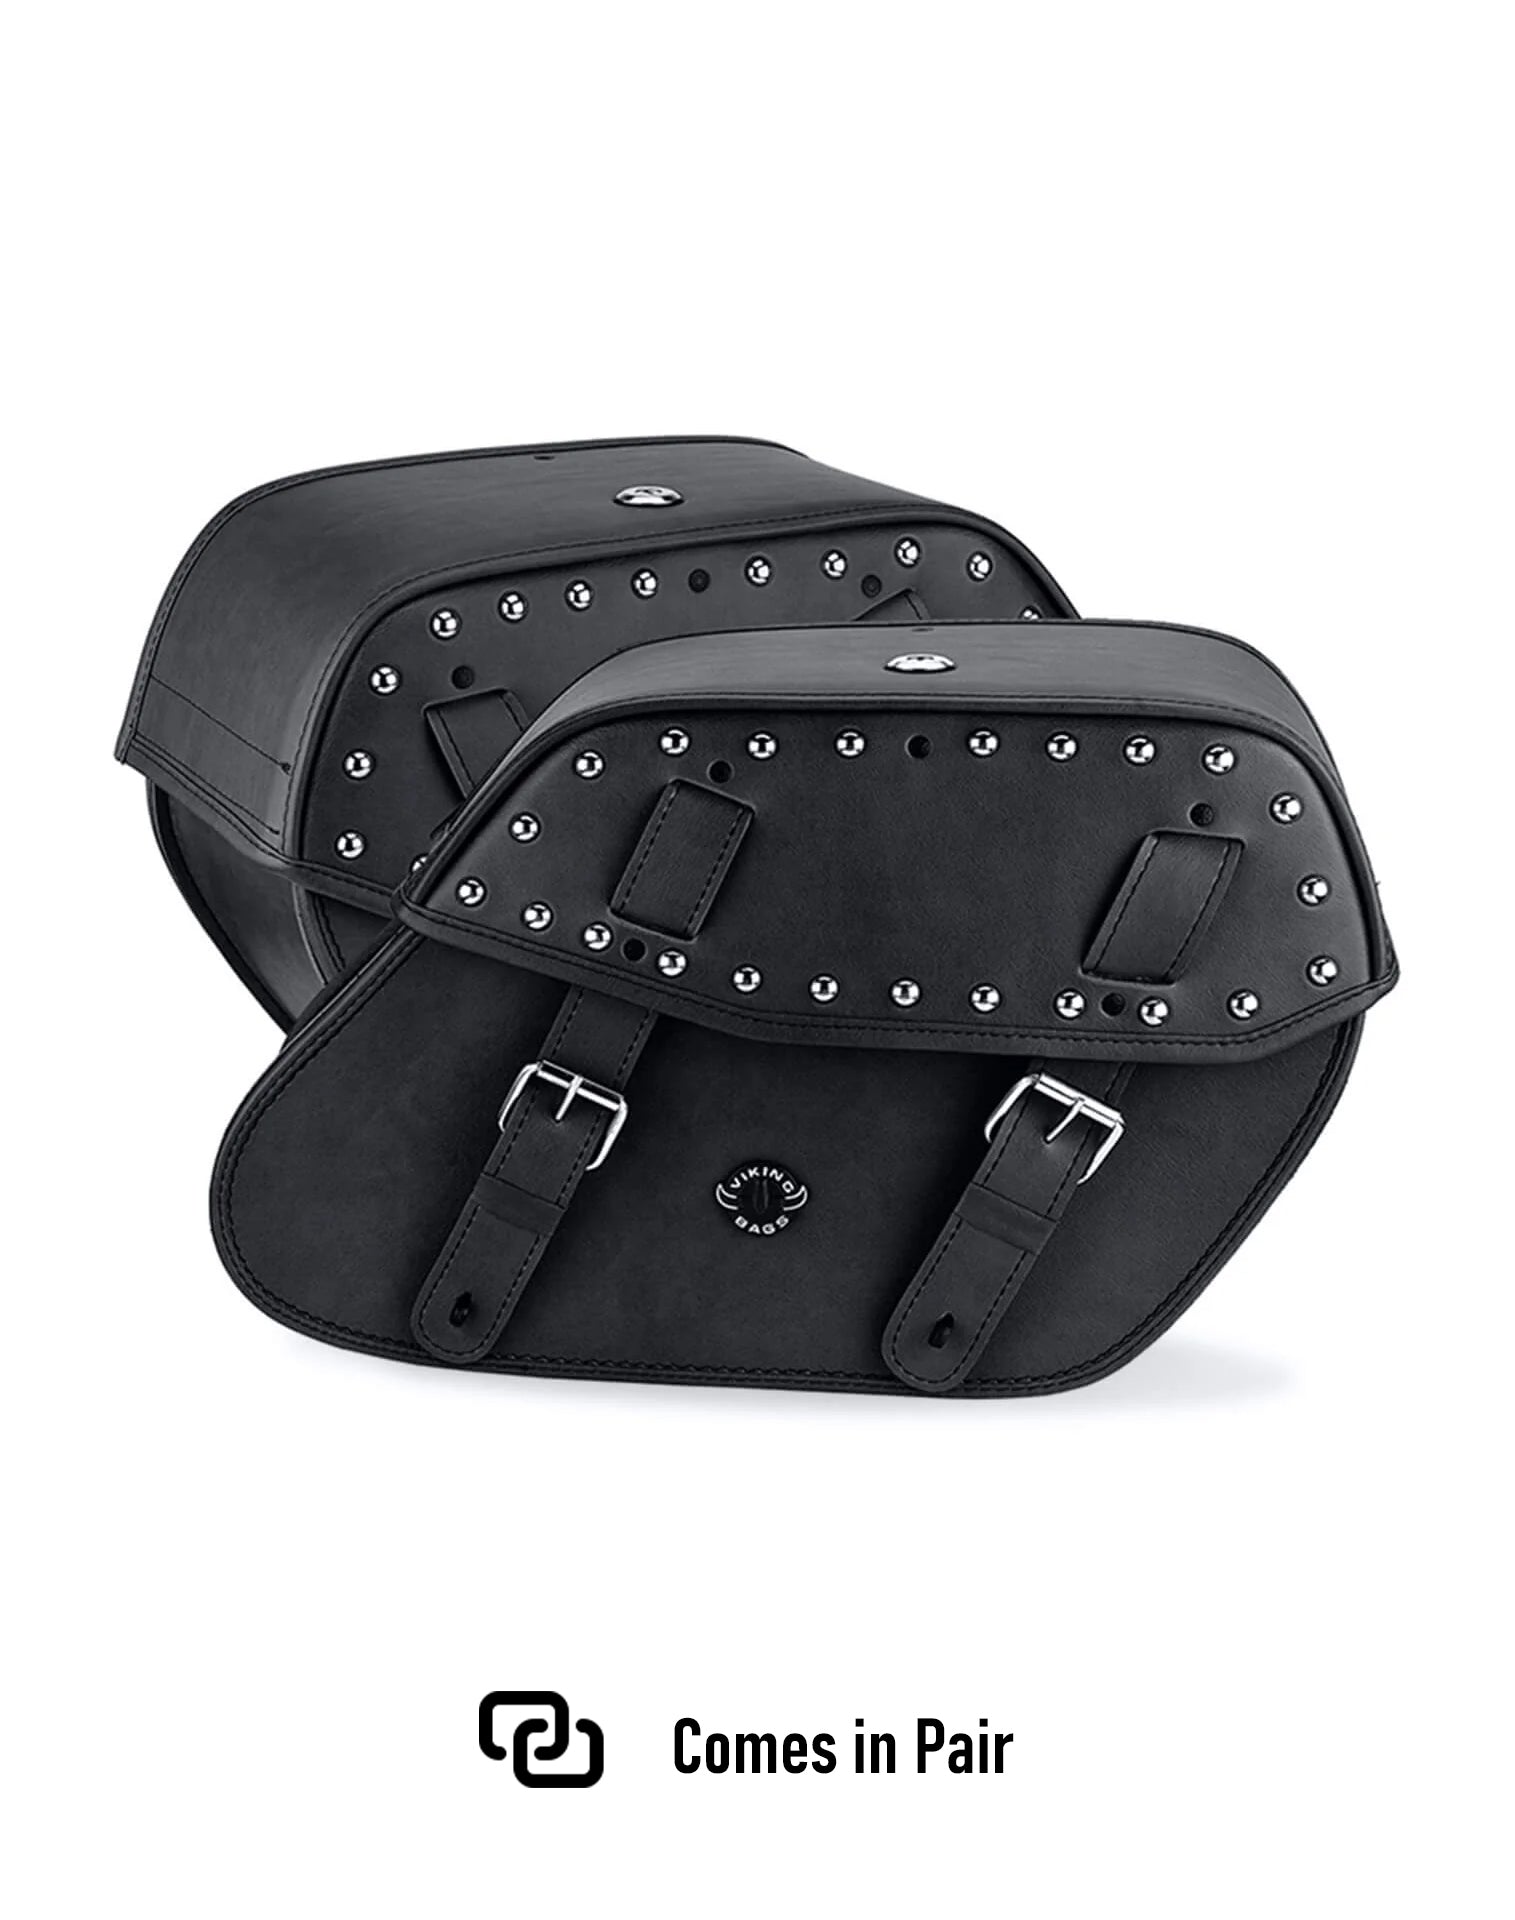 Viking Odin Large Studded Leather Motorcycle Saddlebags For Harley Softail Breakout Fxsb Weather Resistant Bags Comes in Pair